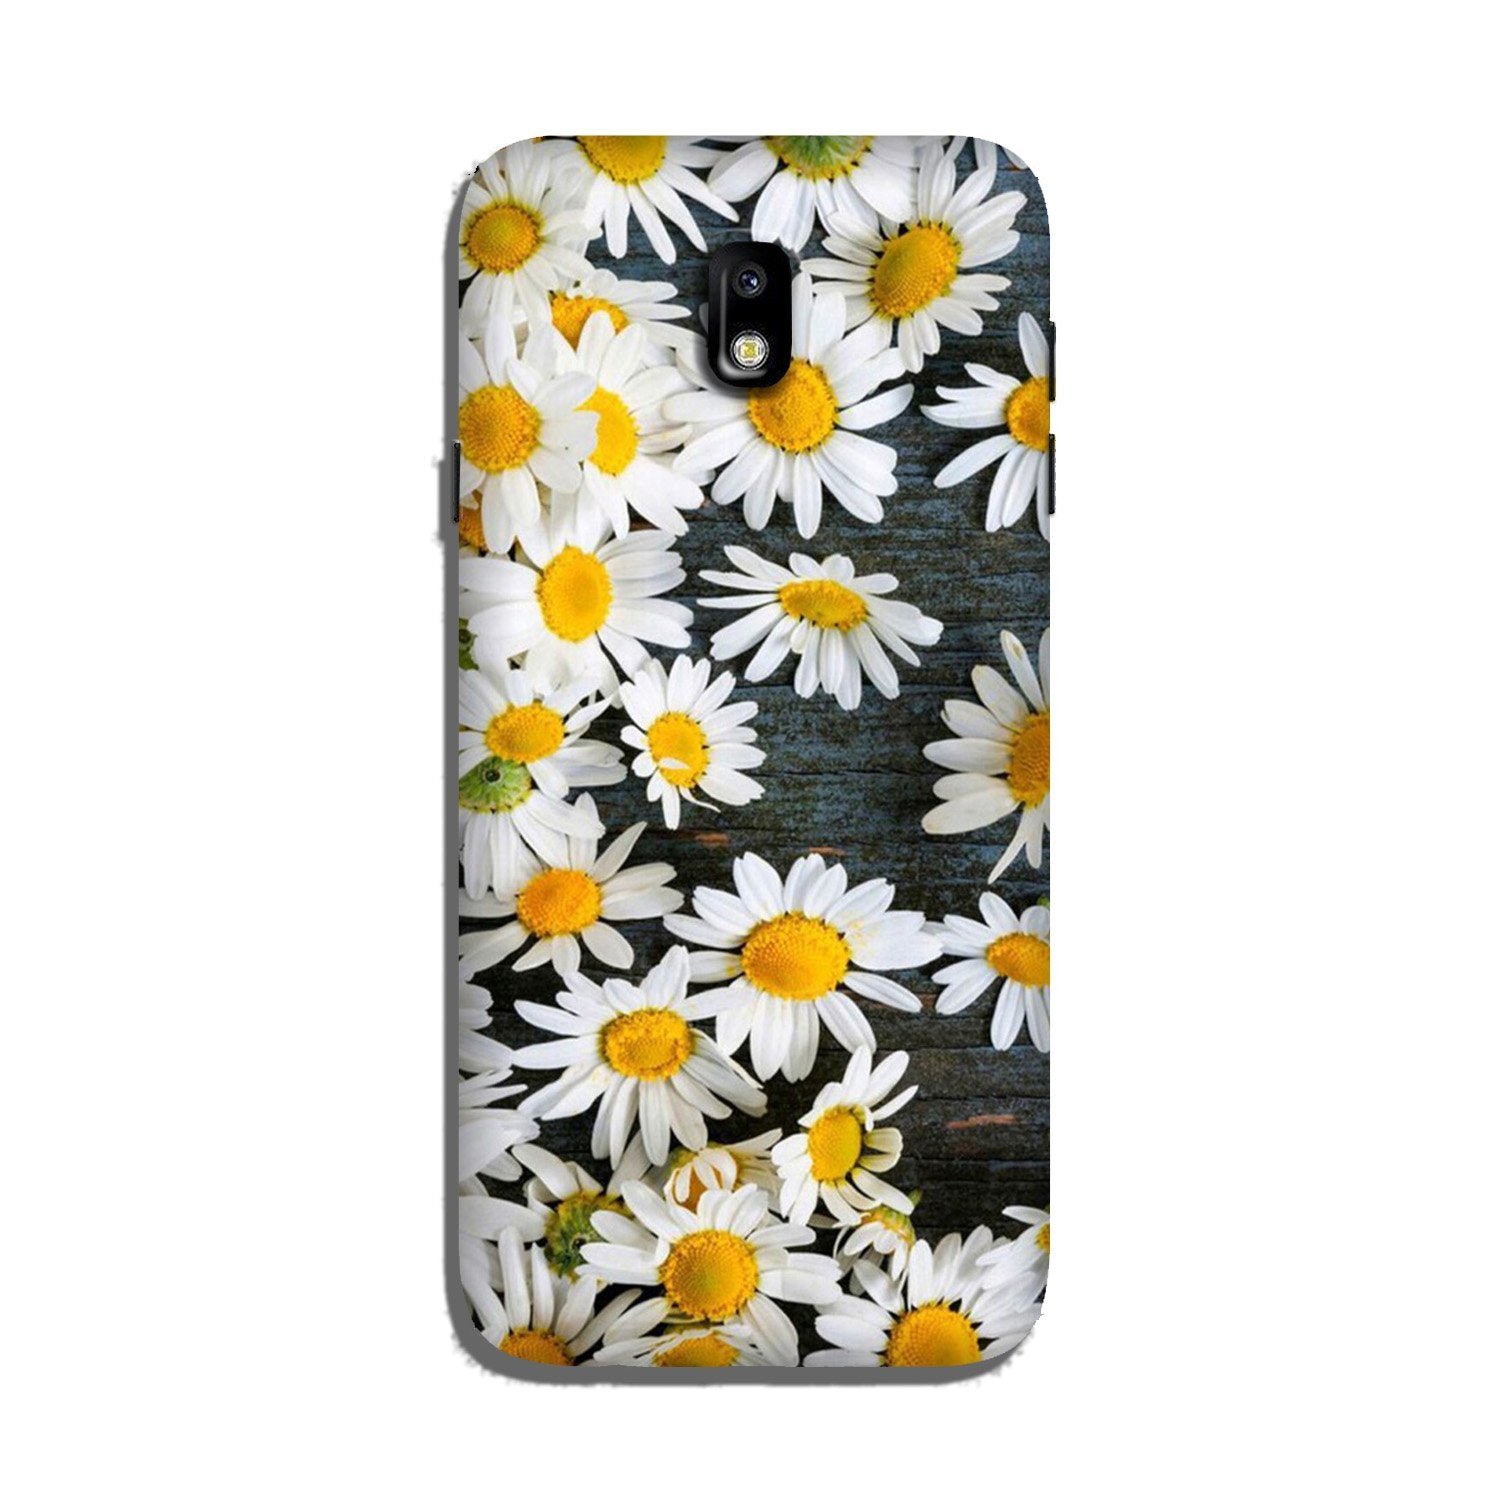 White flowers2 Case for Galaxy J3 Pro